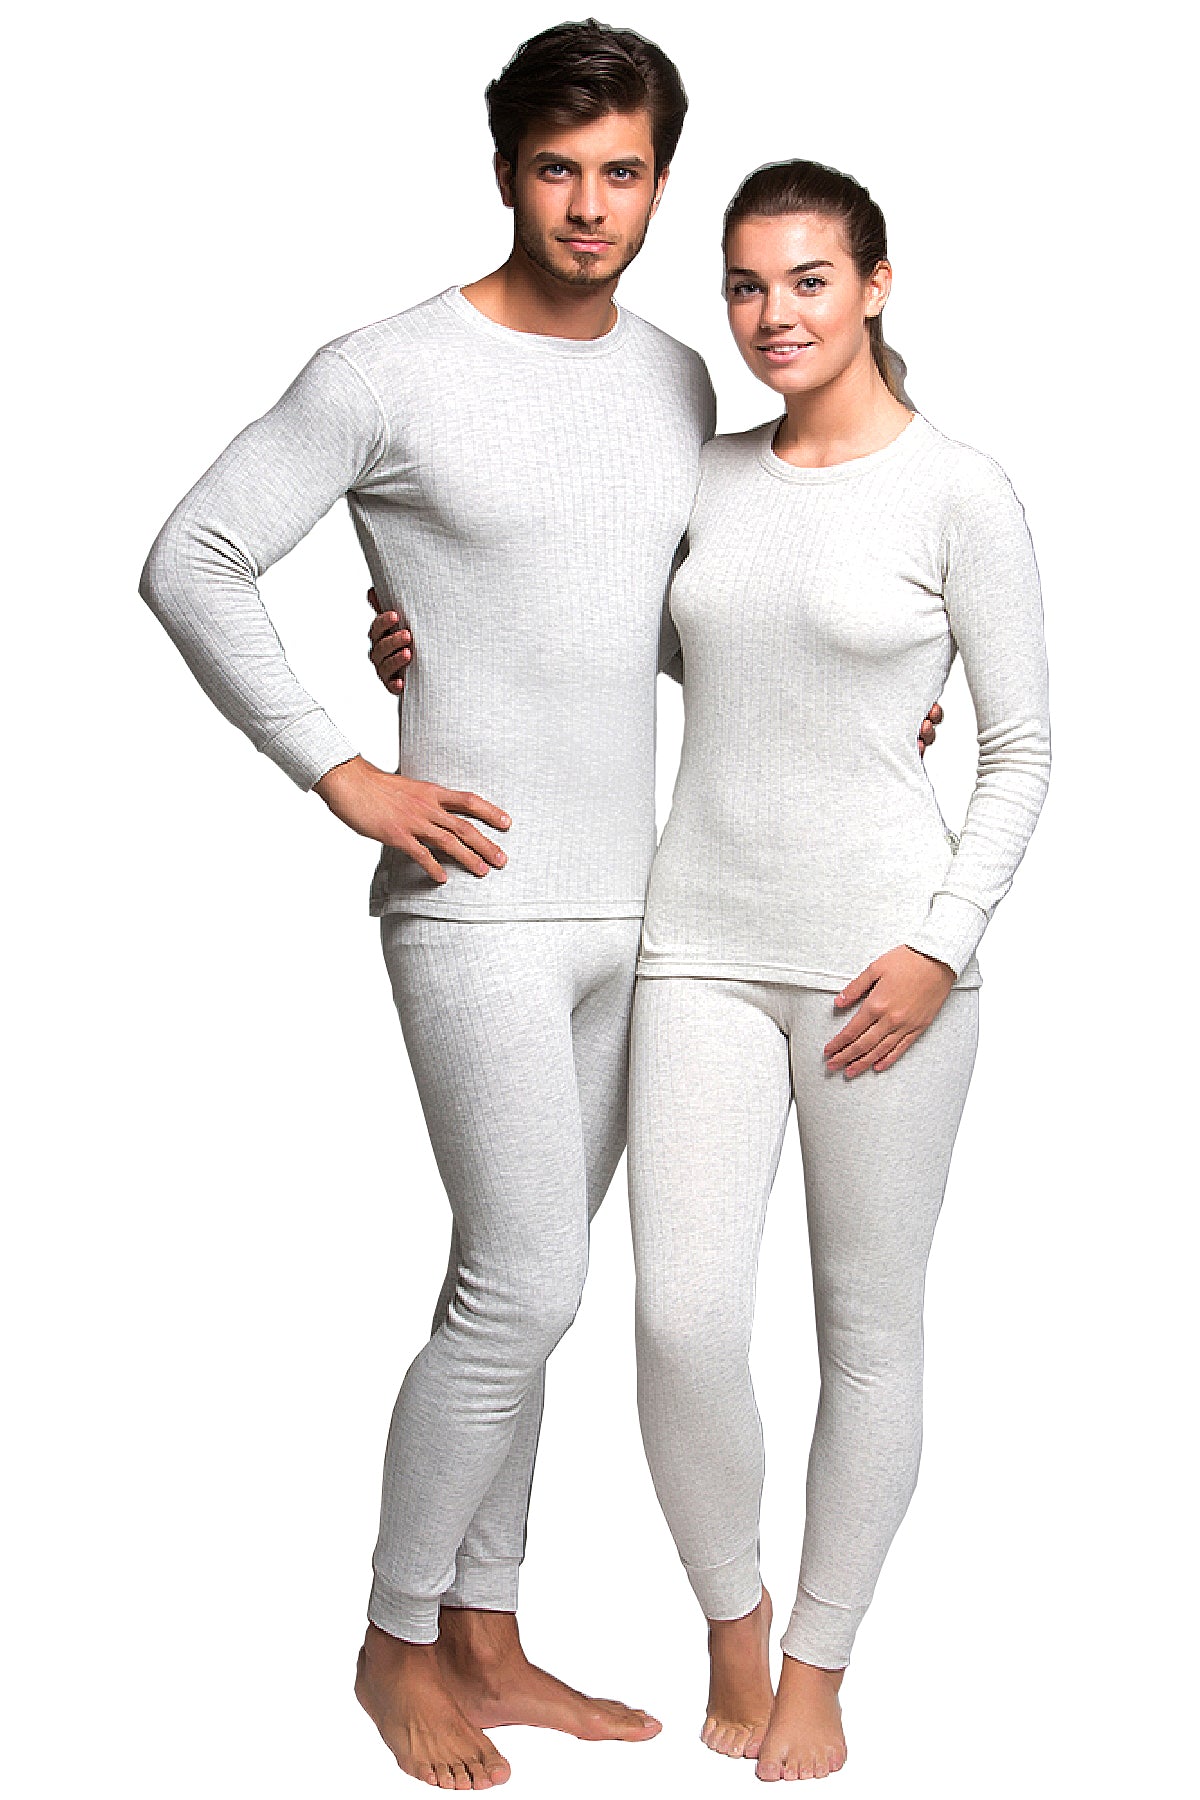 Men's Women's Suits Thermal Underwear Bottoms Tops V neck Winter Seamless  Underclothes Sanding Thin Spandex Wholesale